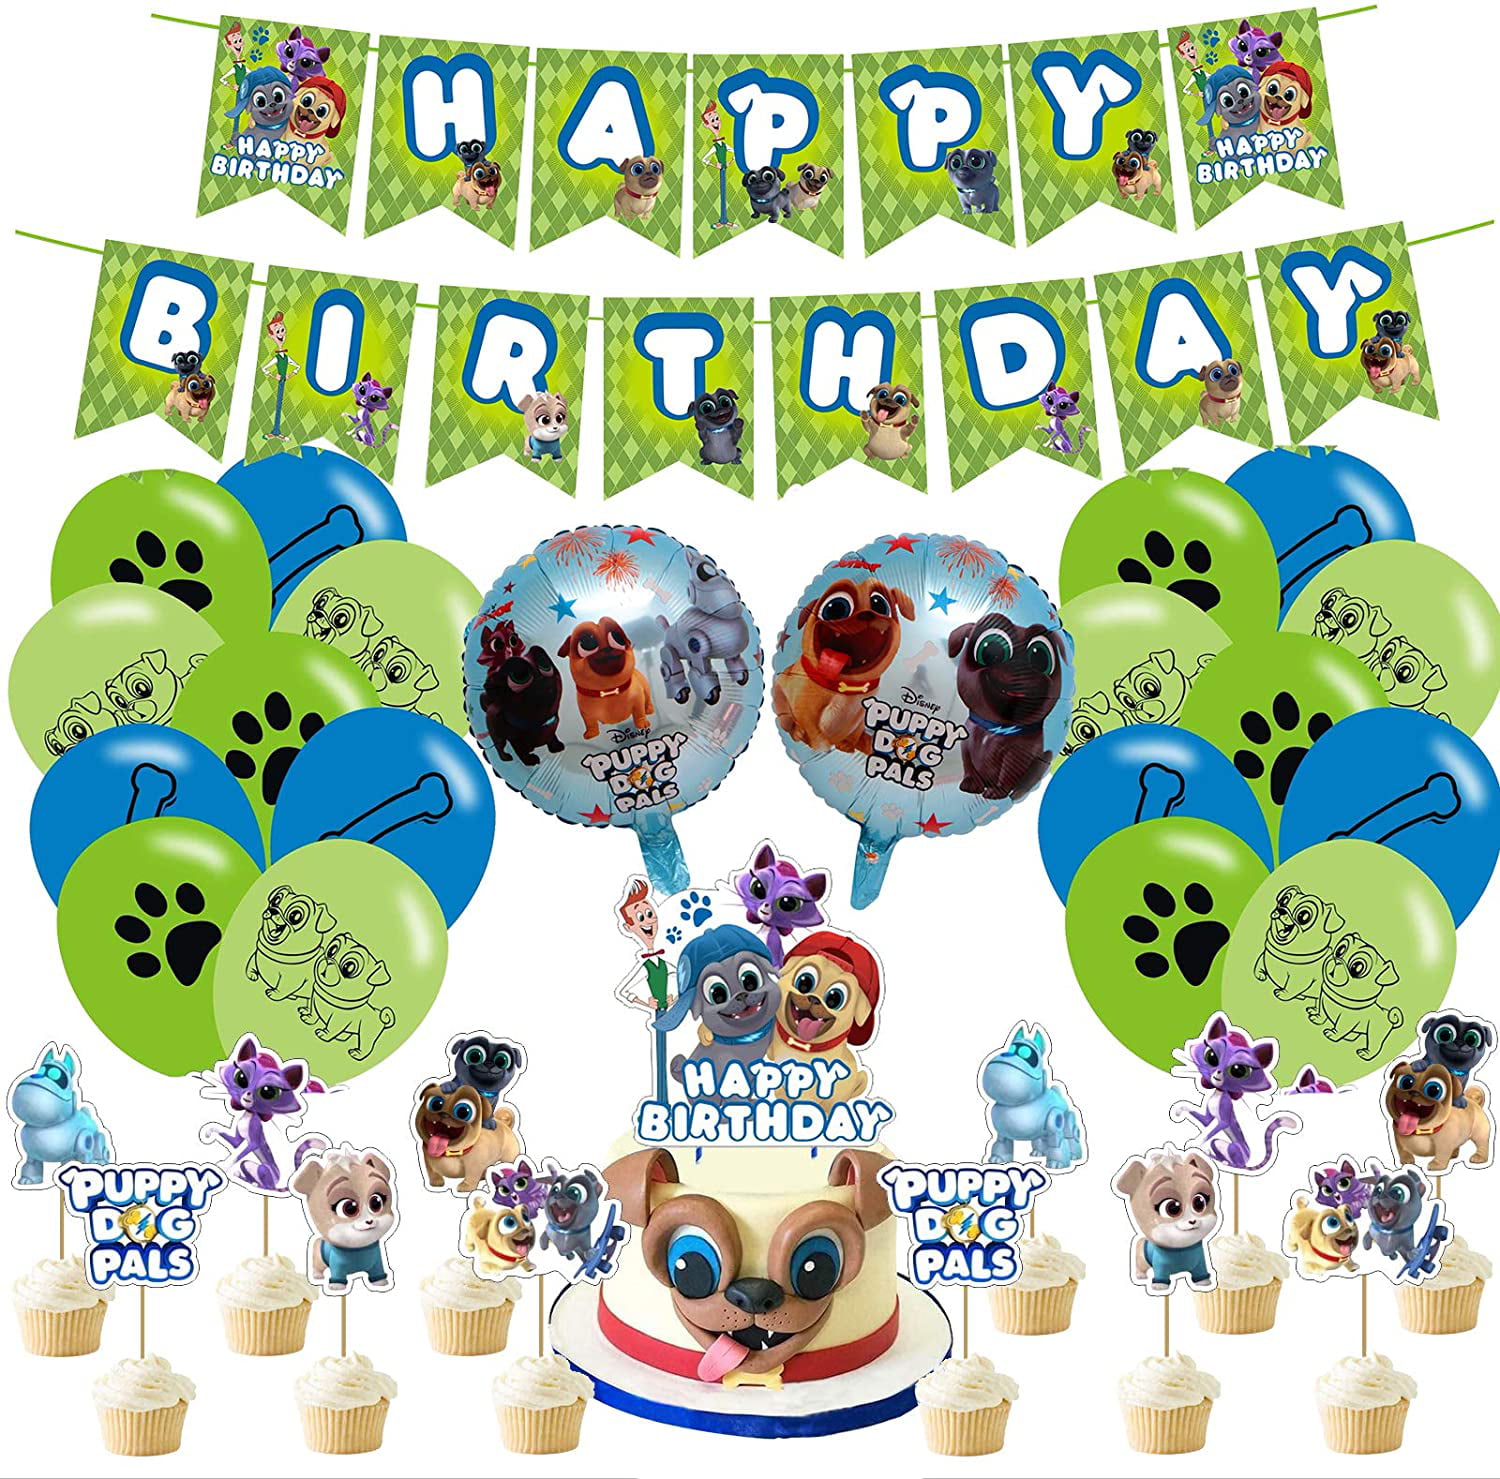 Set of 6 Disney Puppy Dog Pals Balloons Birthday Party Supplies 